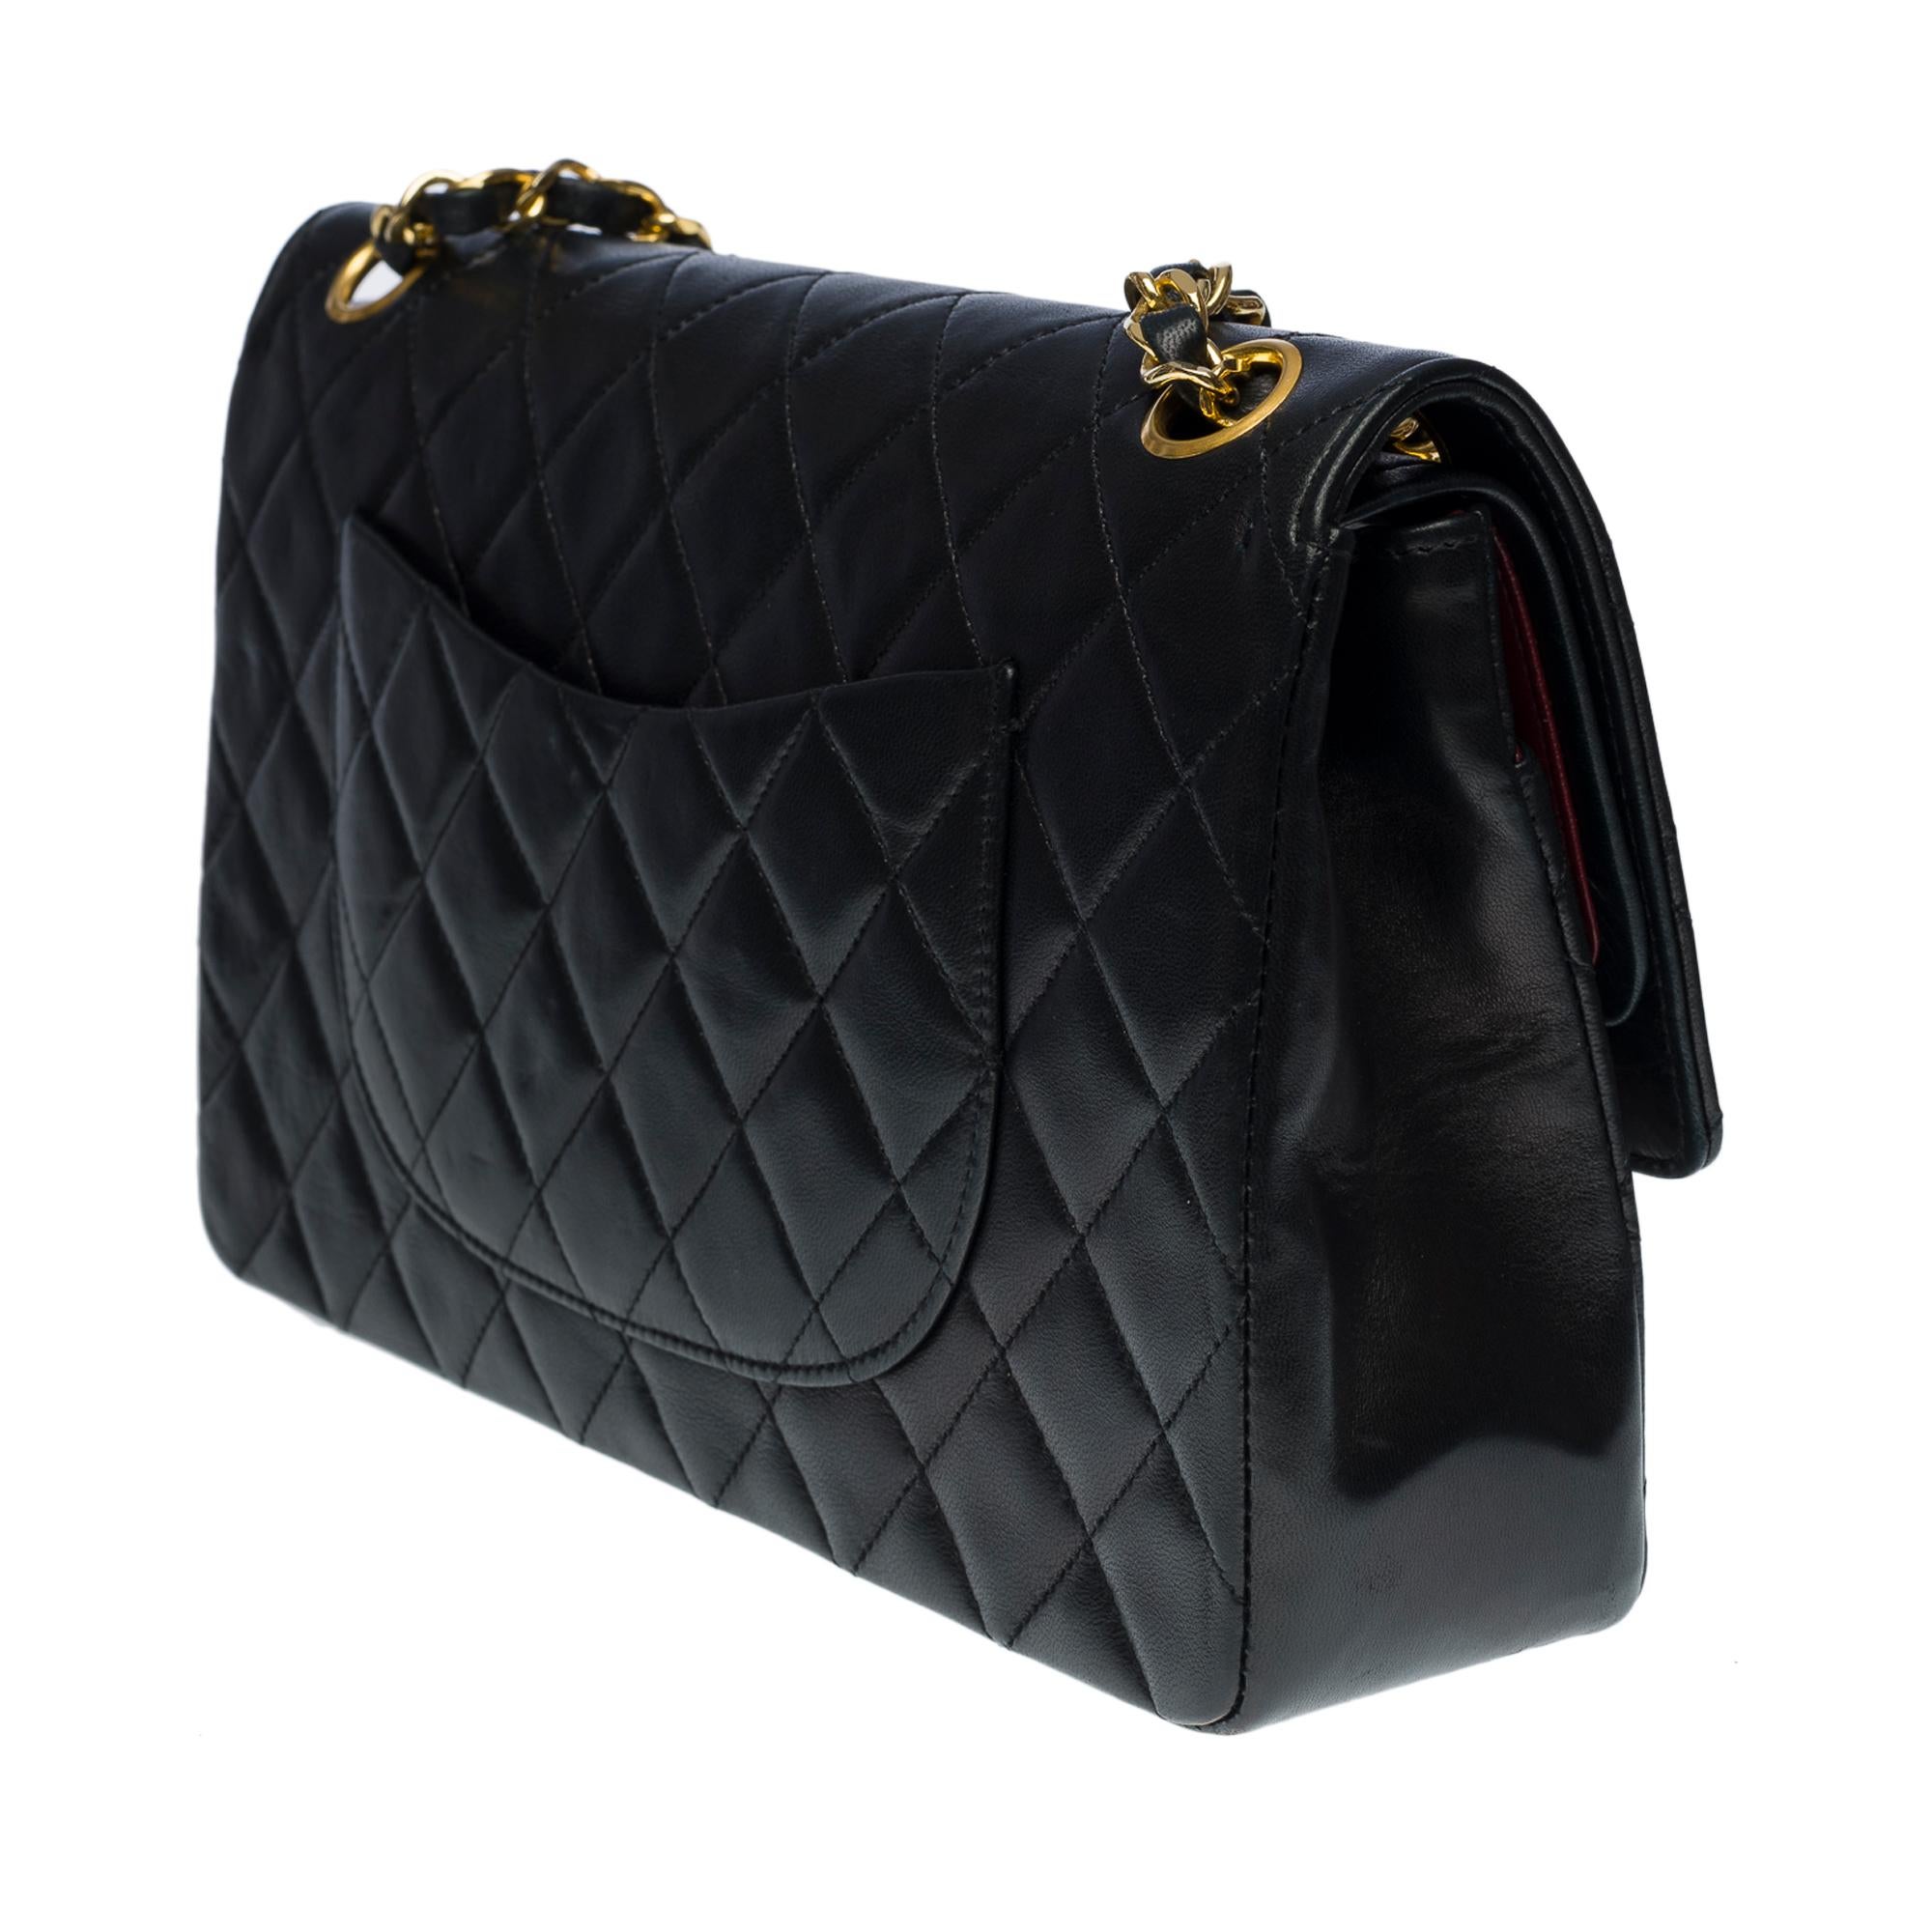 Chanel Medium Timeless double flap shoulder bag in black quilted lambskin, GHW 2